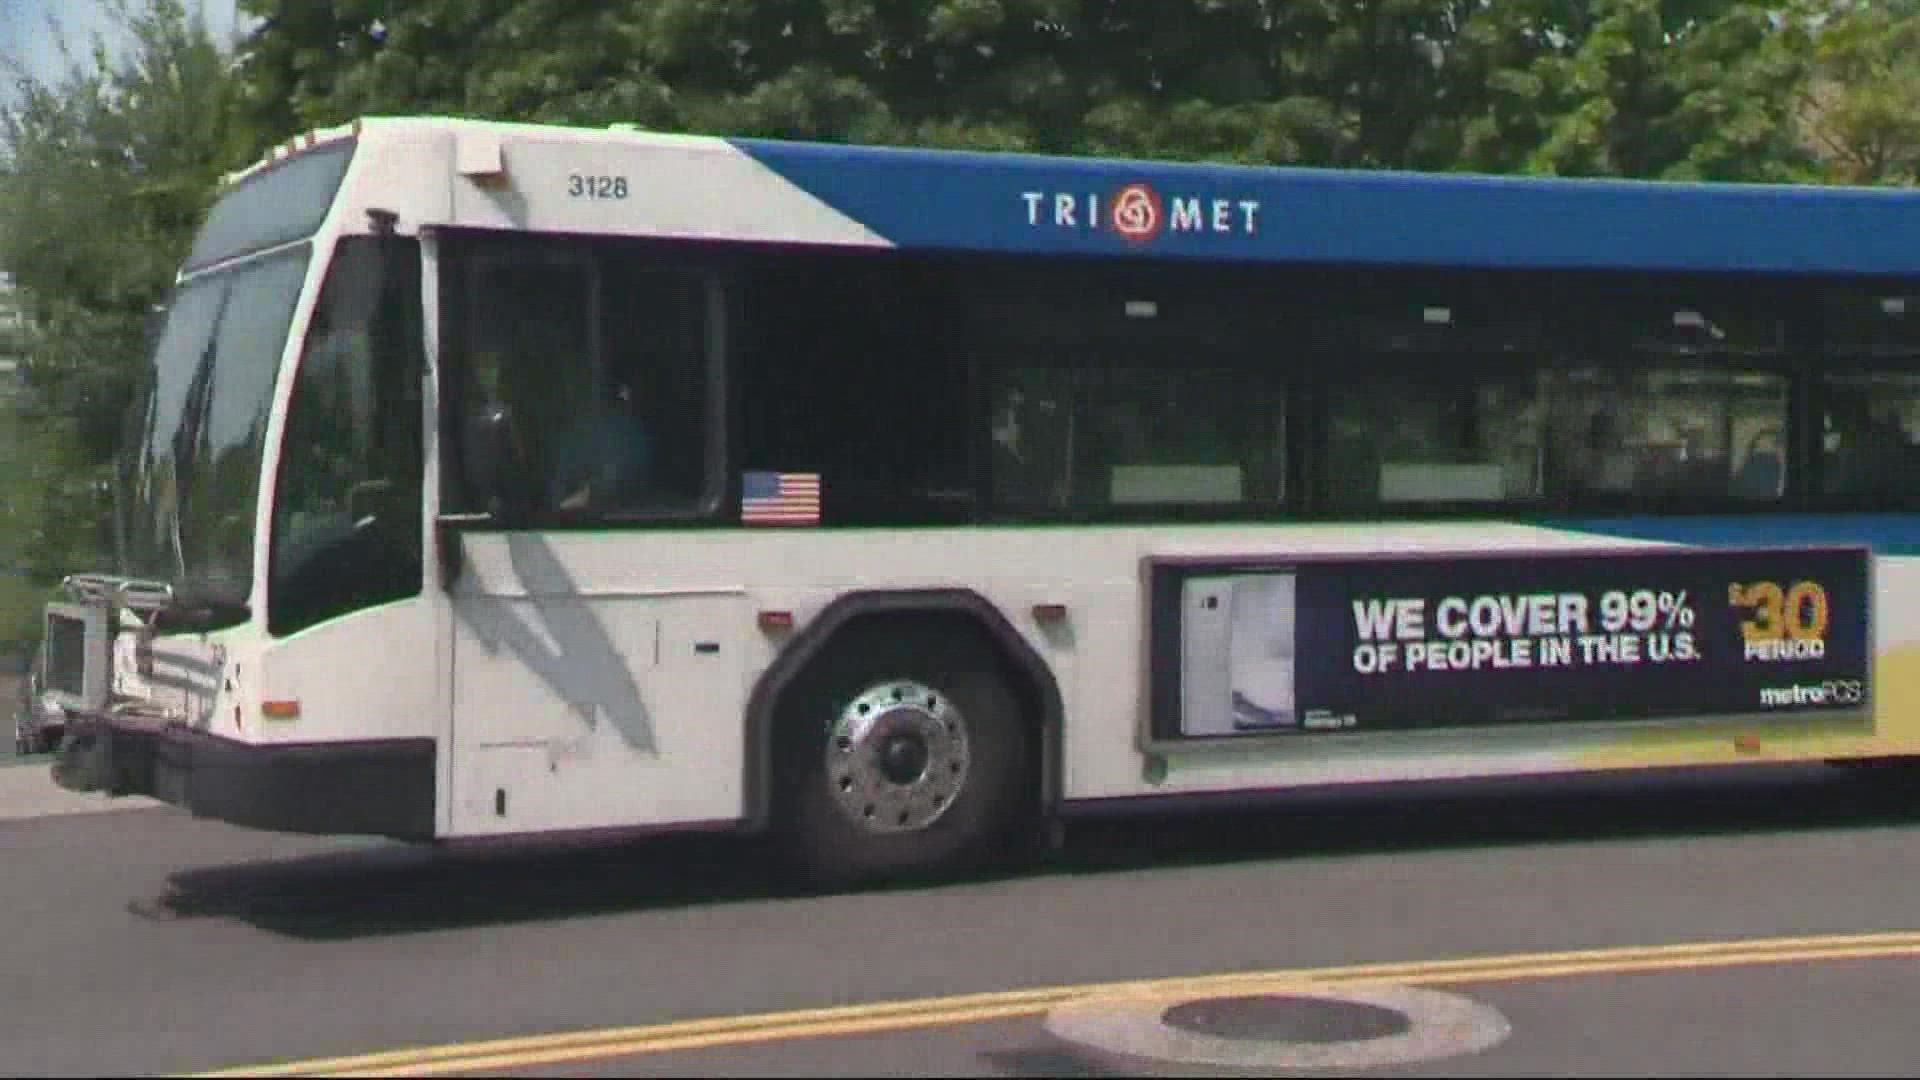 The agency says it needs hundreds of new bus operators to keep up with demand. Now it’s increasing entry wages to help make that happen.